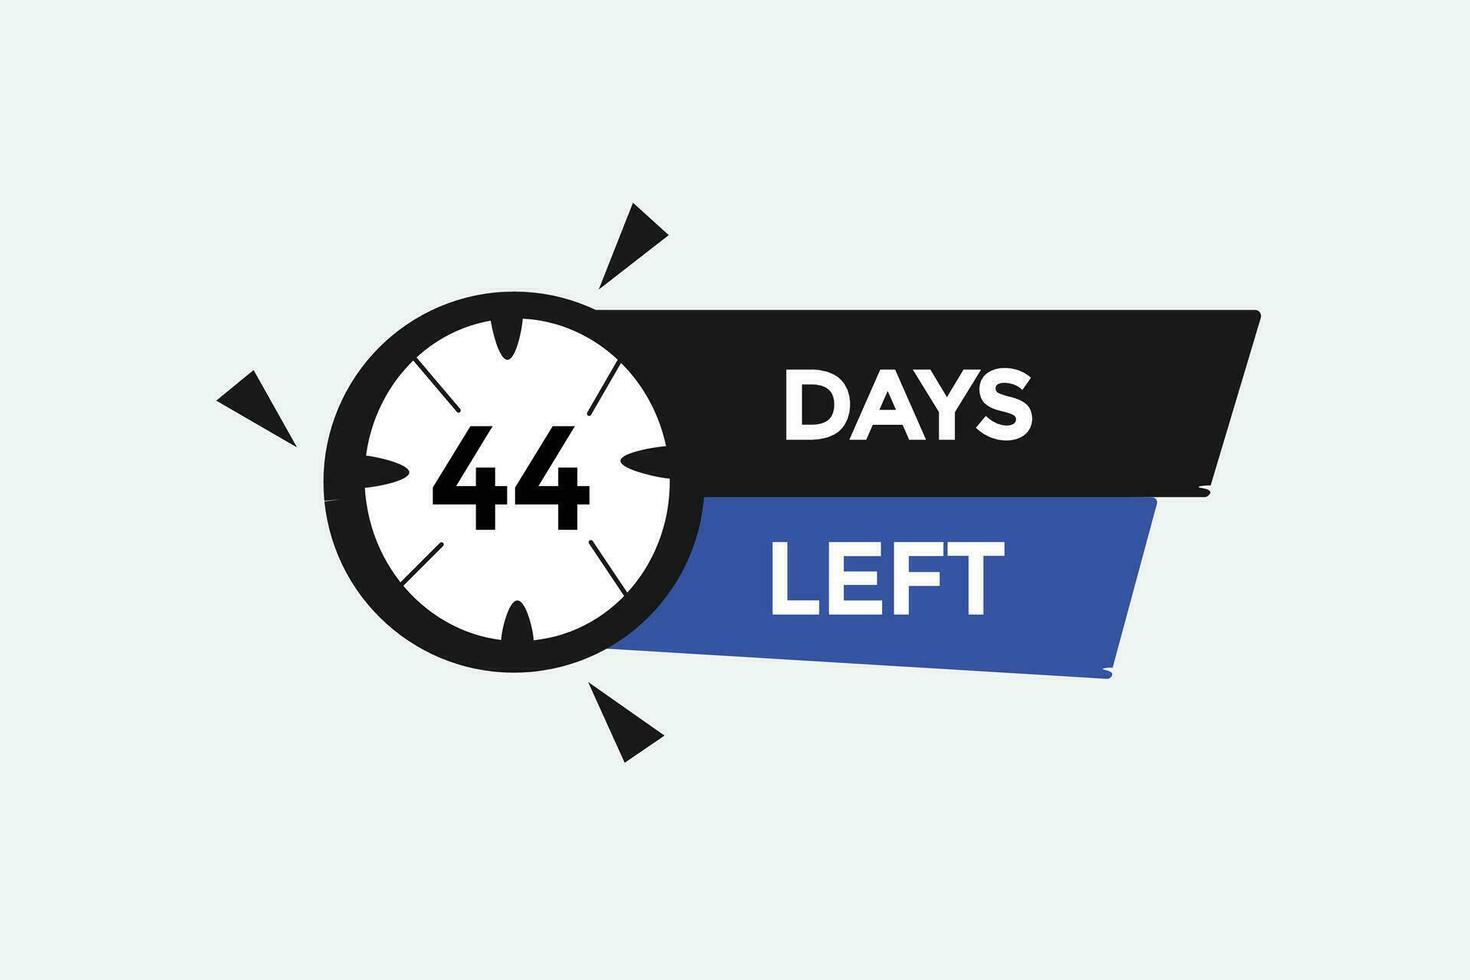 44 days left countdown template,44  day countdown left banner label button eps 44 vector